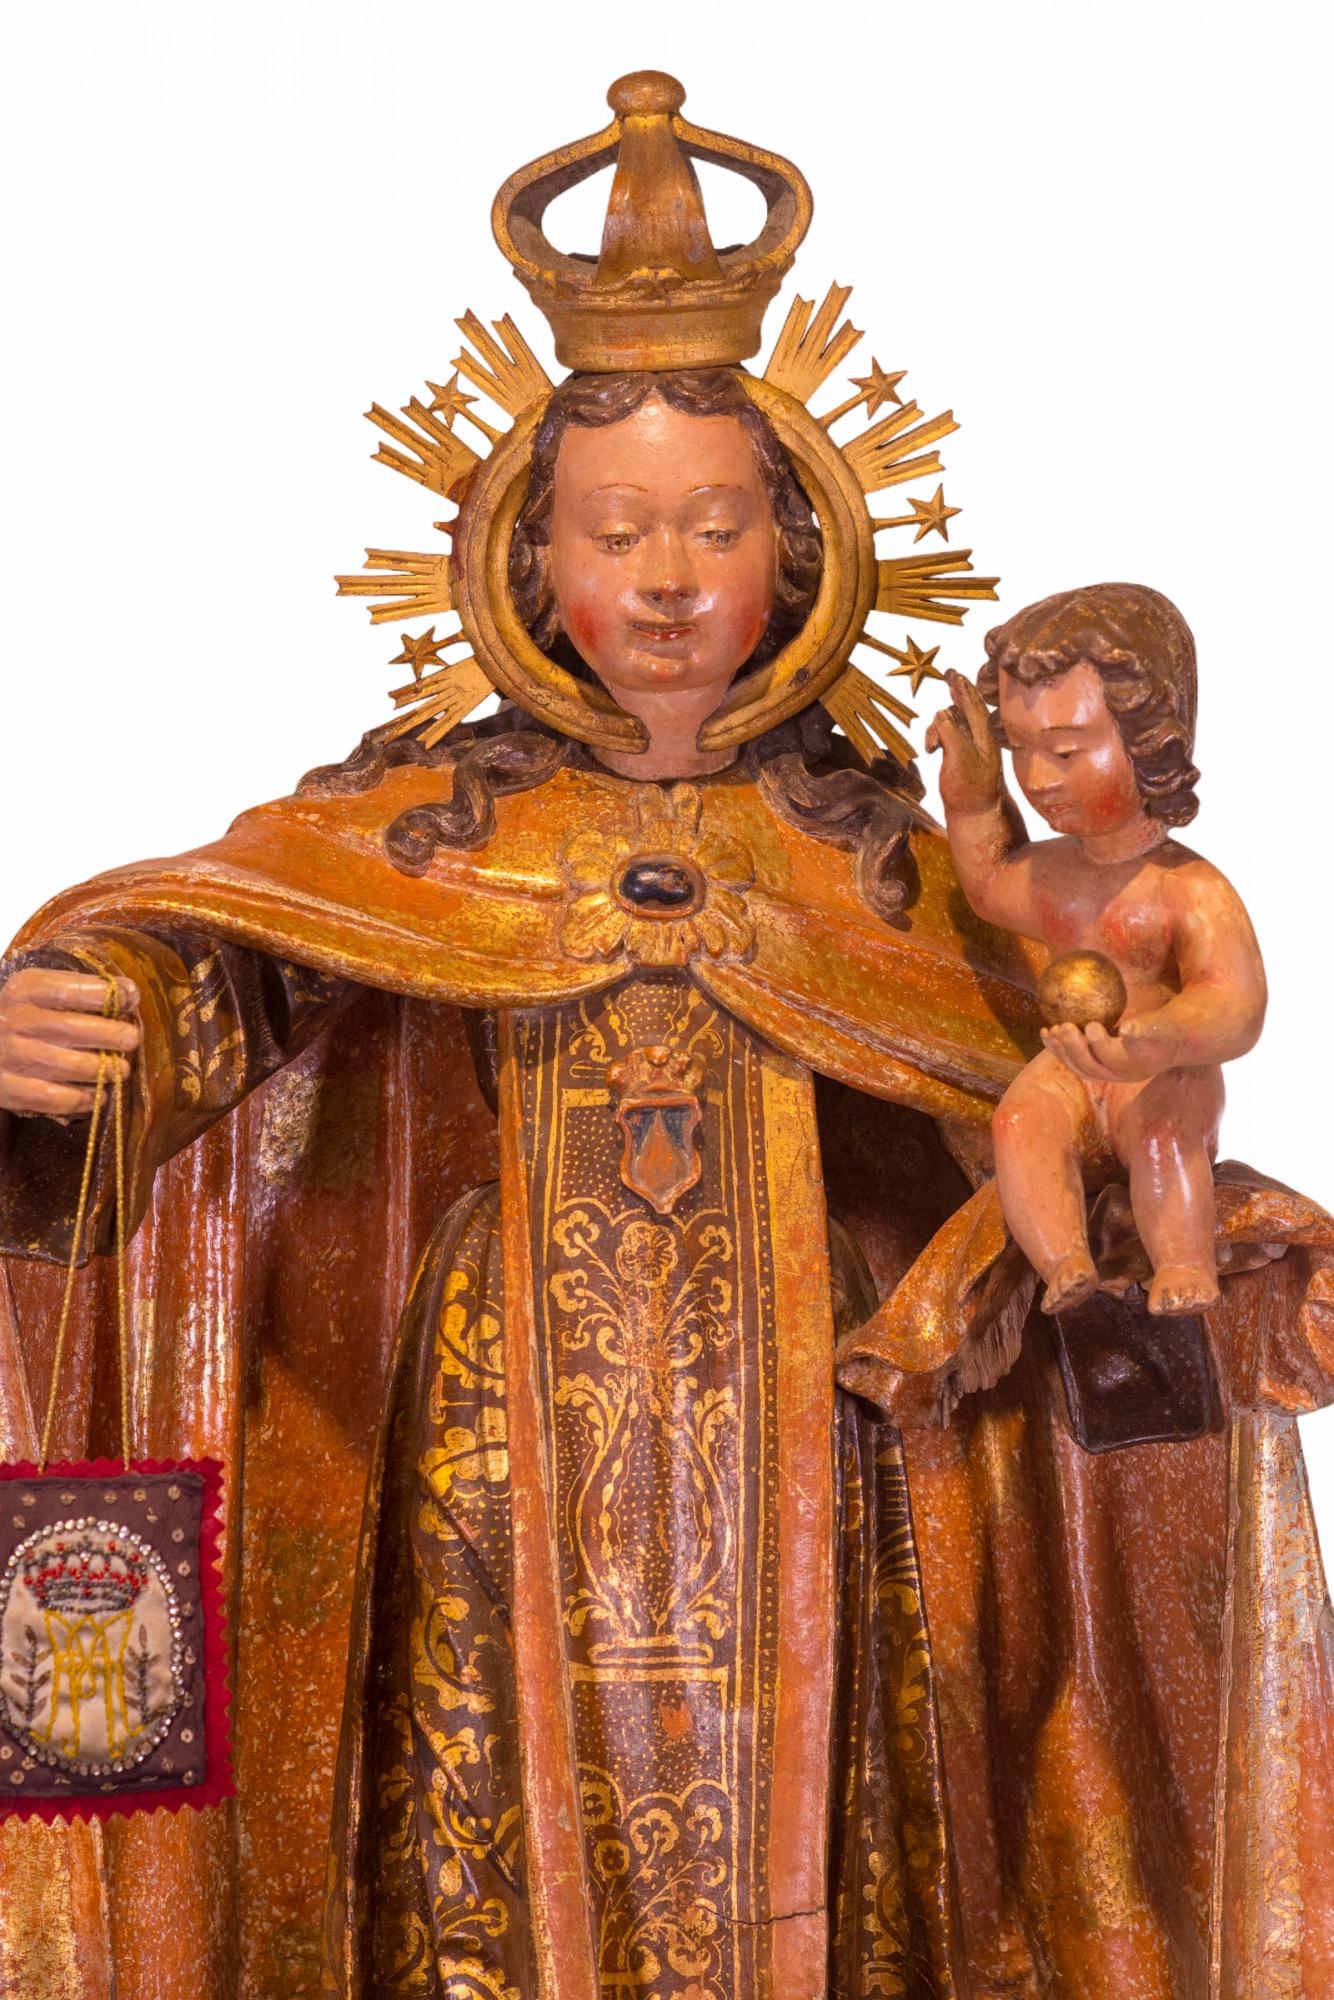 16th Century Spanish gold gilded and polychromed Carved-wood sculpture of Our Lady of Mount Carmel. She depicts the Blessed Virgin Mary in her role as patroness of the Carmelite Order. She was above the main altar for approximately 500 years. The